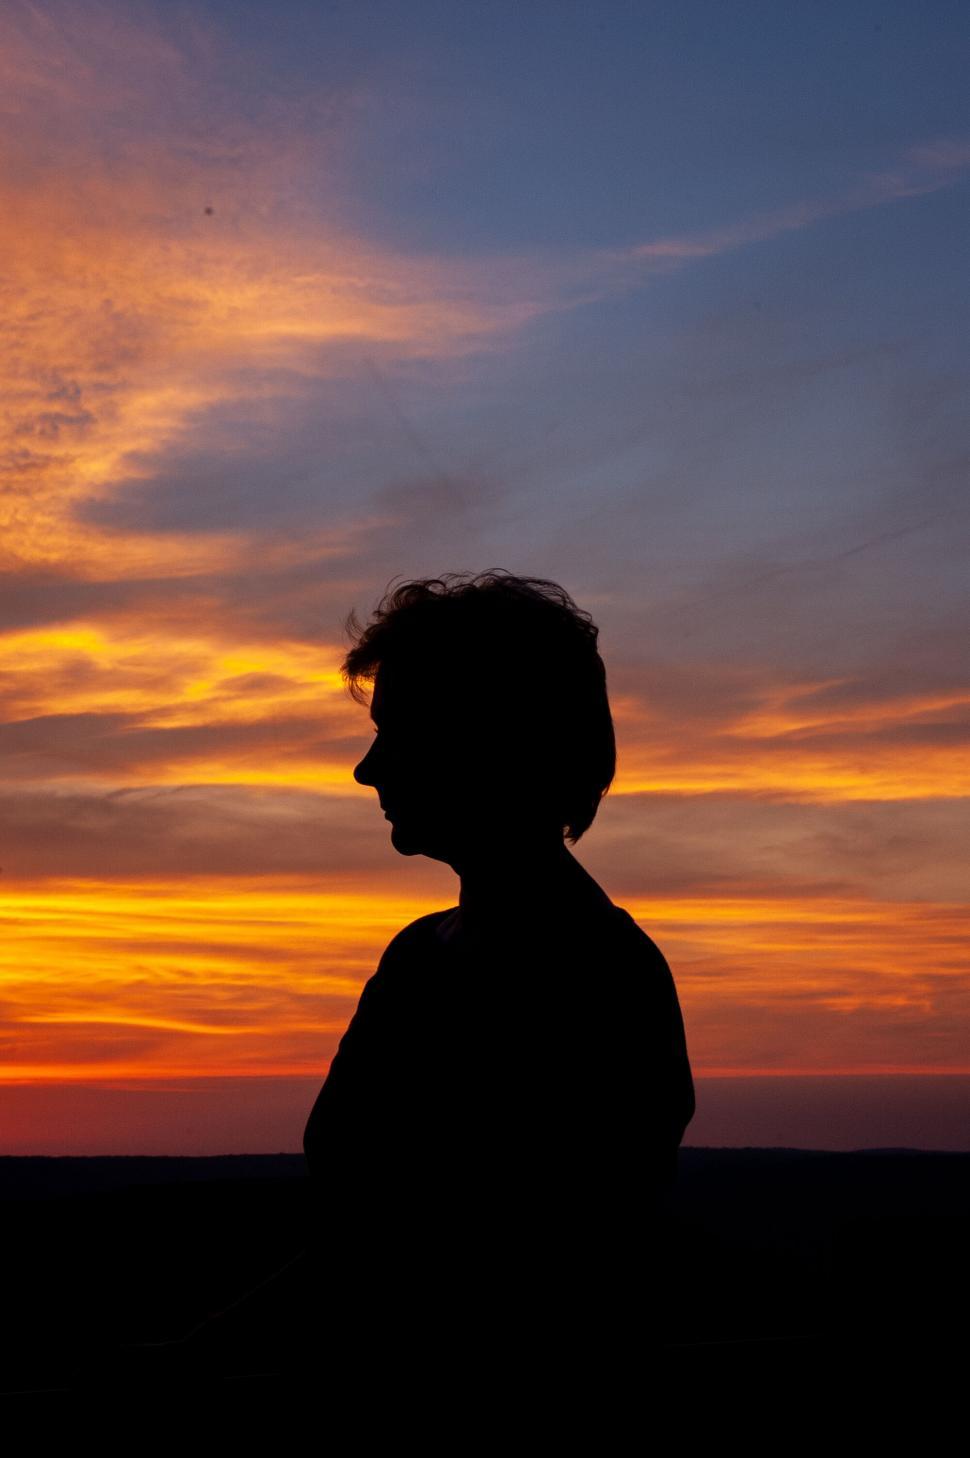 Free Image of Silhouette of a person against vibrant sunset sky 